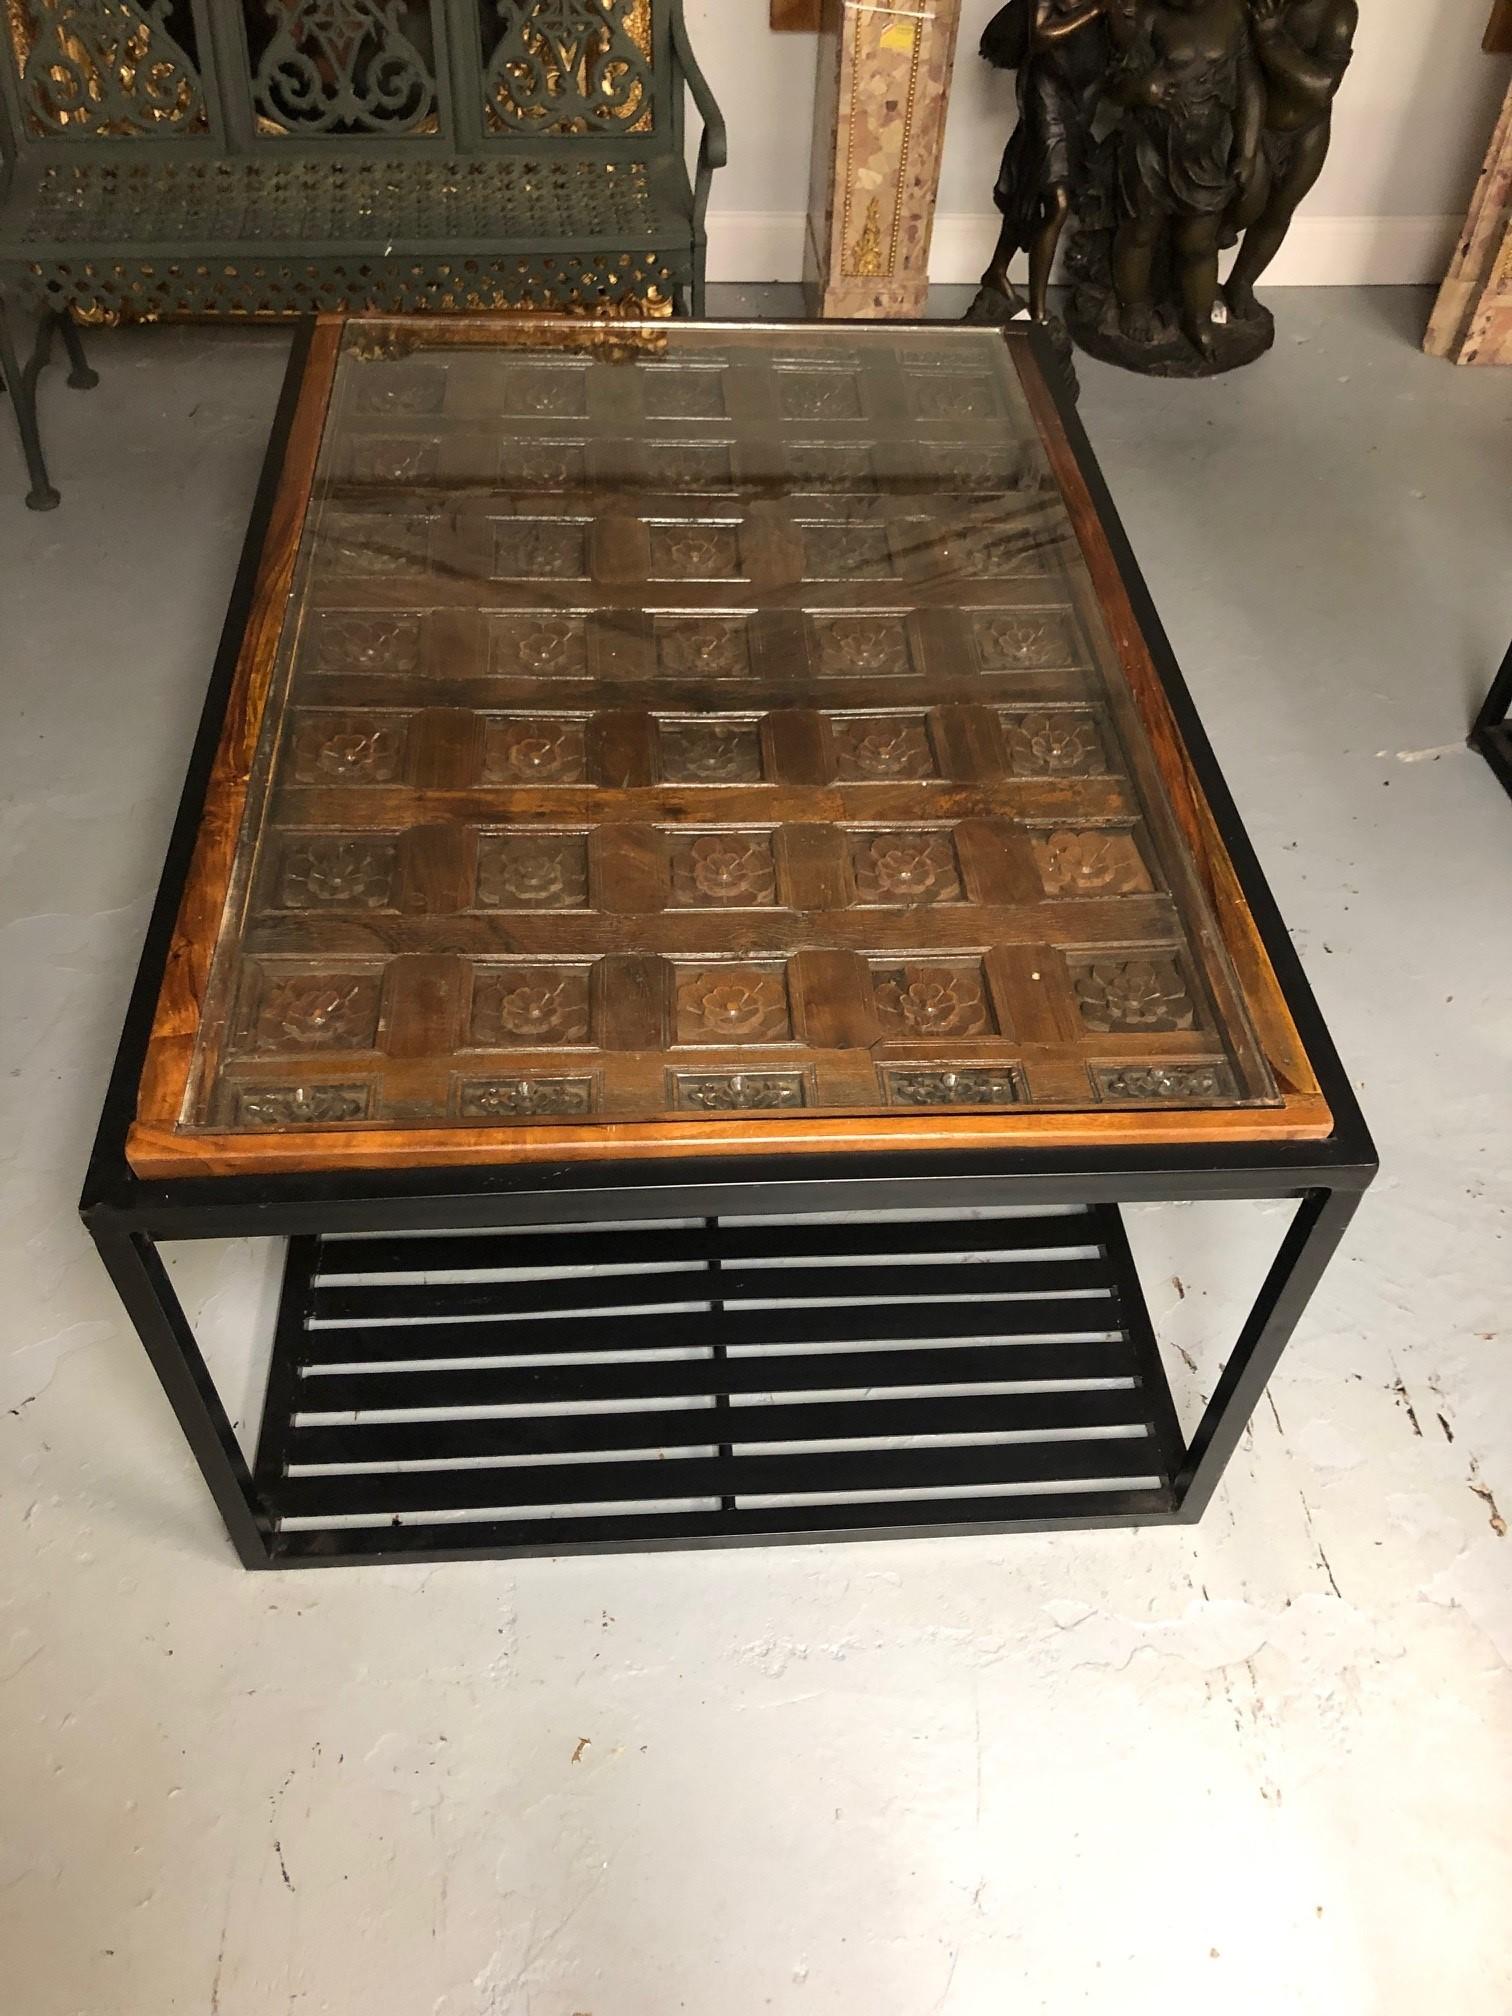 Late 1800s antique carved wood door or ceiling panel made into a coffee or accent table with a glass top. The panel was put into a new custom made metal base which looks fantastic together. This table is from Rajasthan India which is one of India's